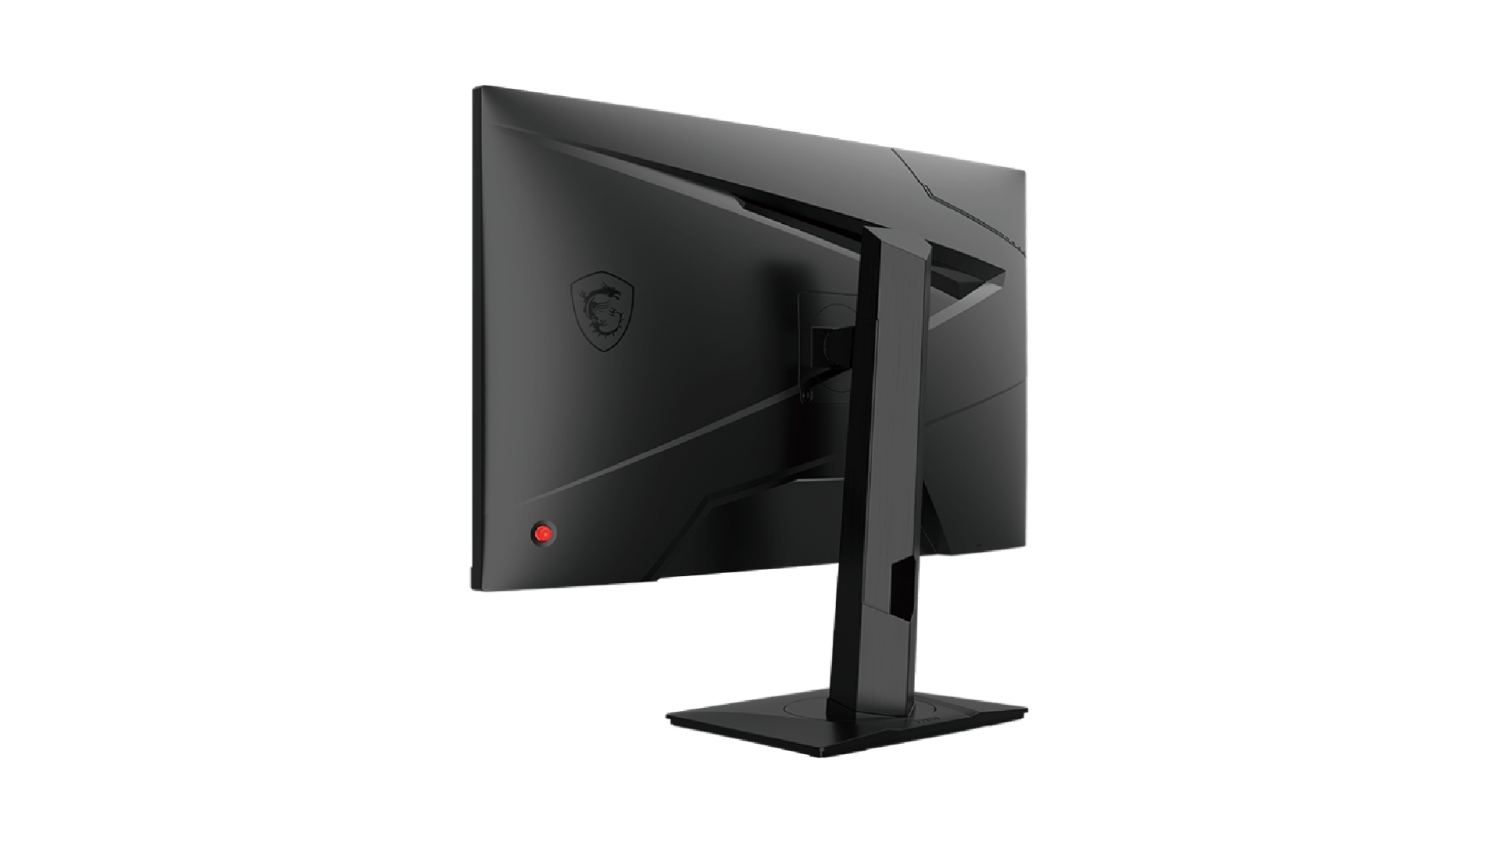 MSI G274QPF-QD is an affordable 1440p display sequel to one of the 